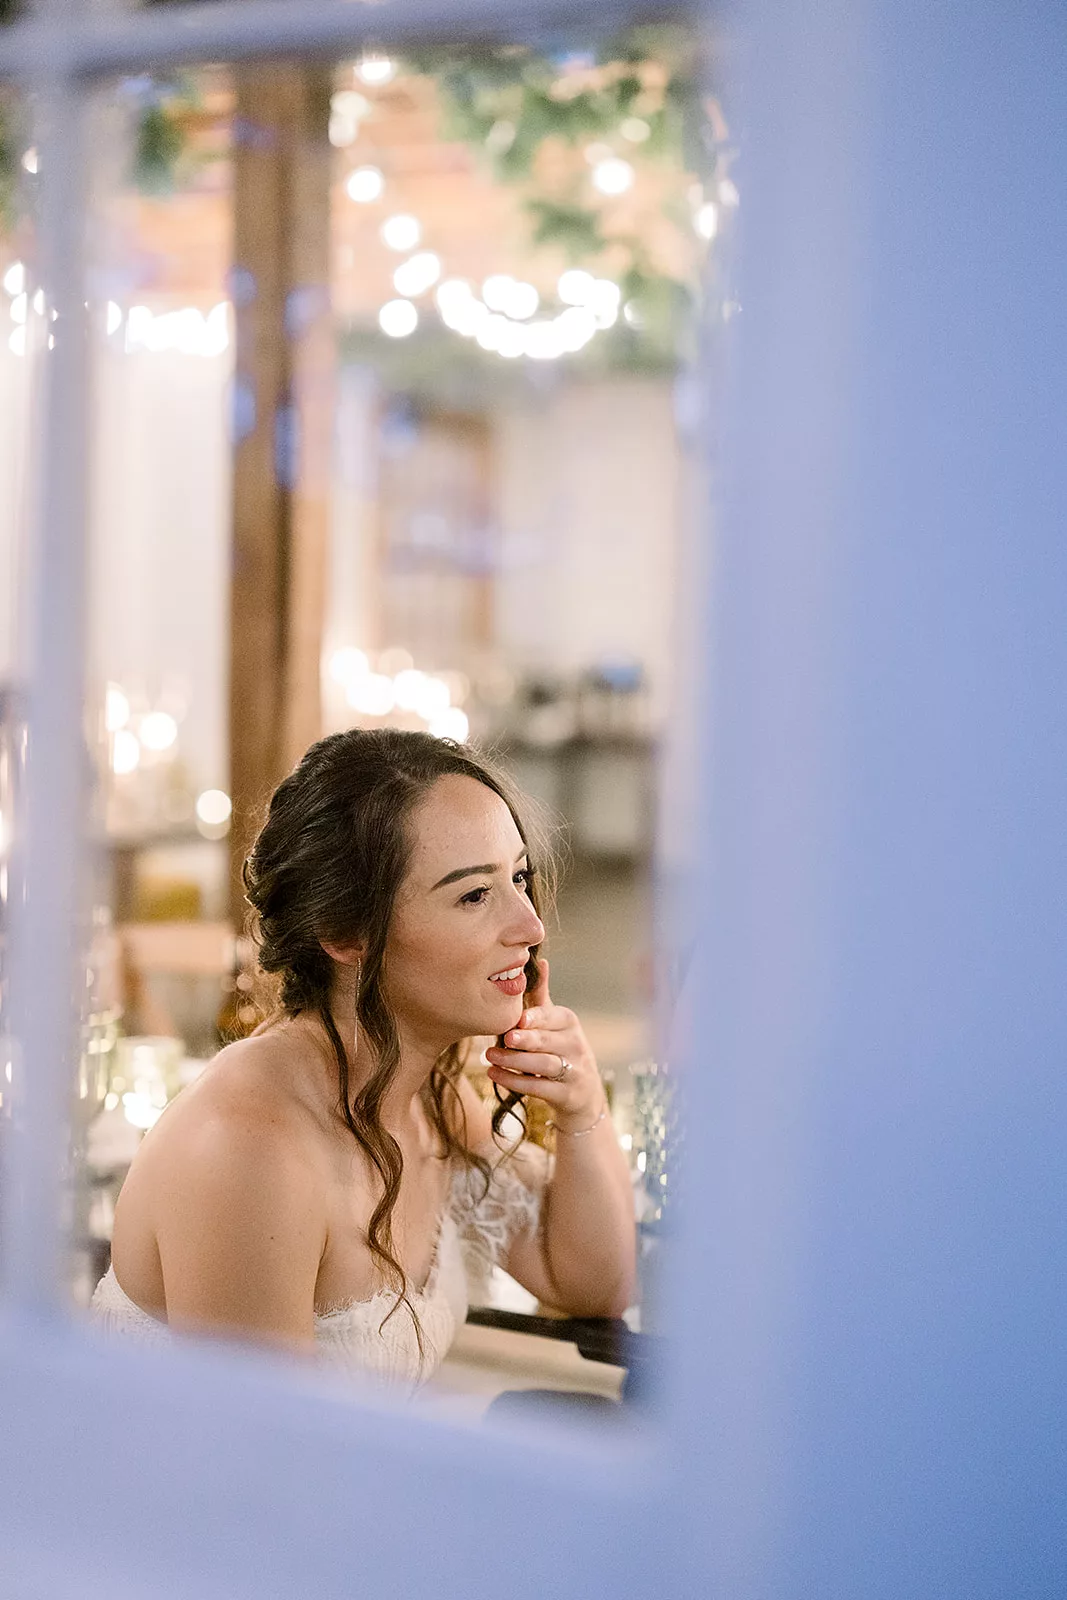 A bride sits inside a window at a reception table